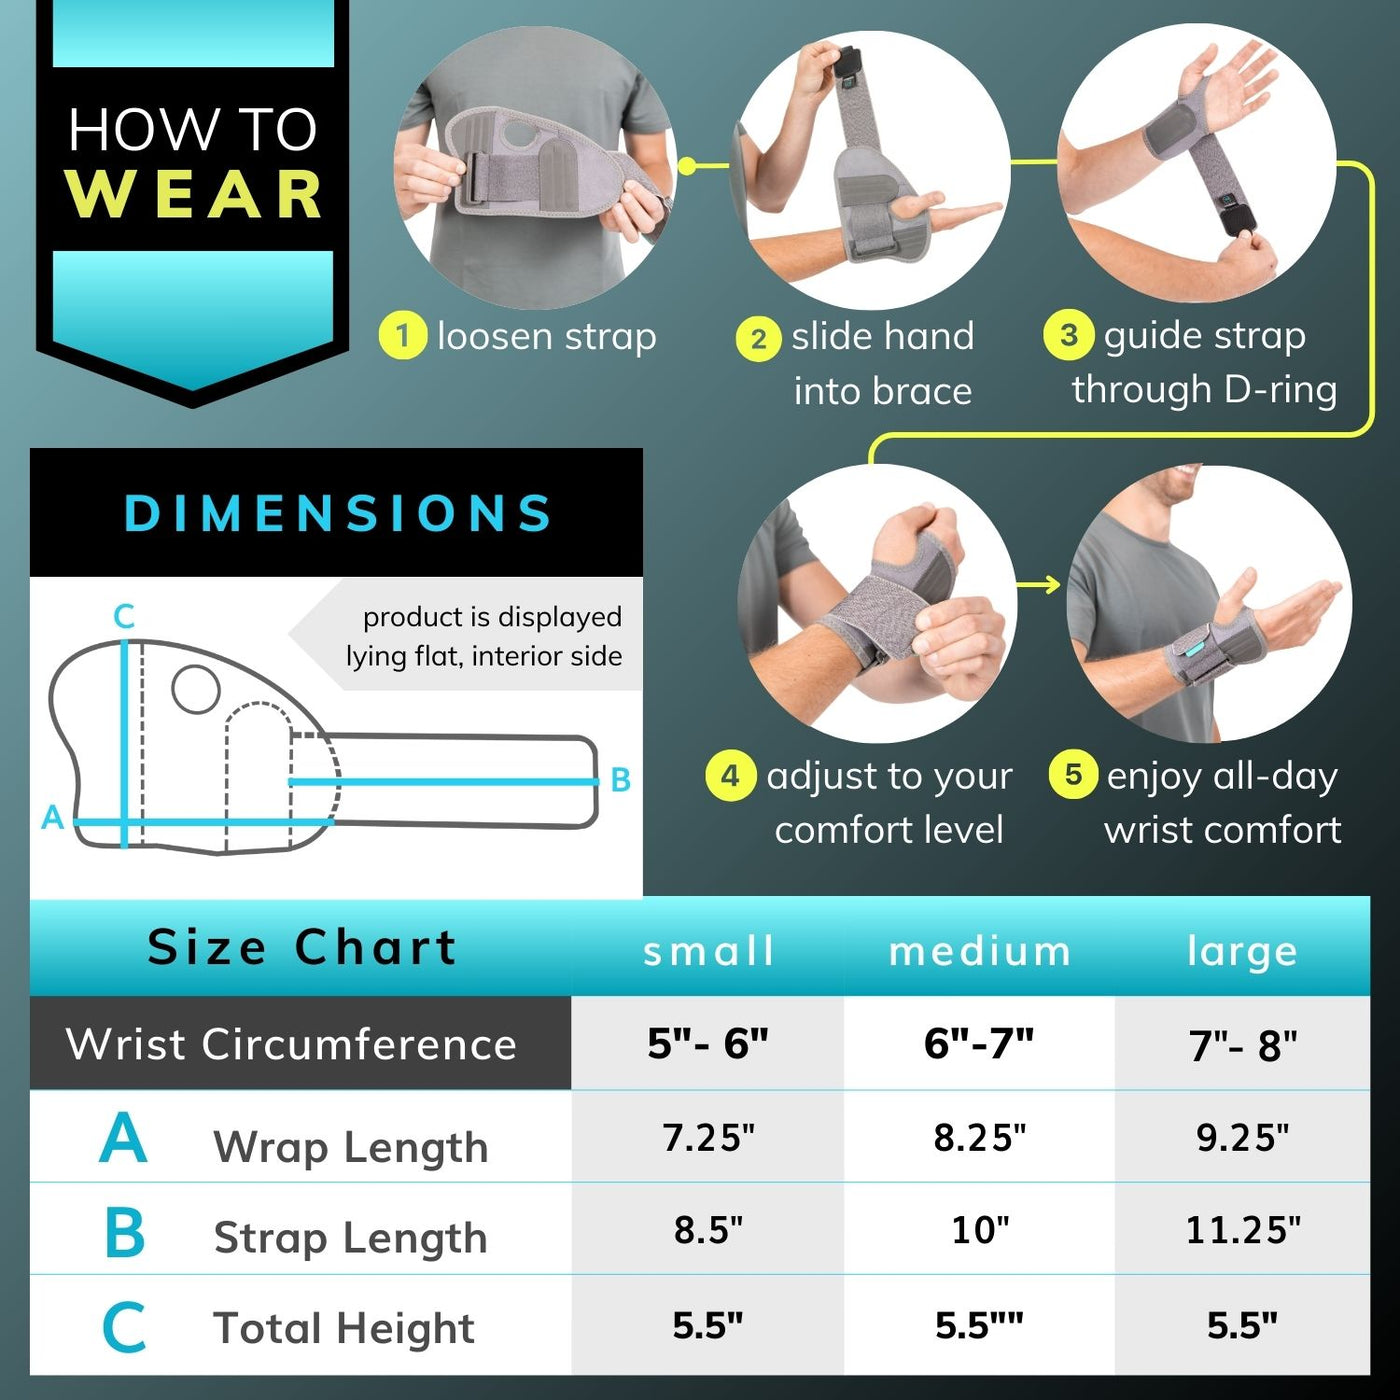 The sizing chart for the athletic wrist brace comes in sizes small, medium, and large fitting most people